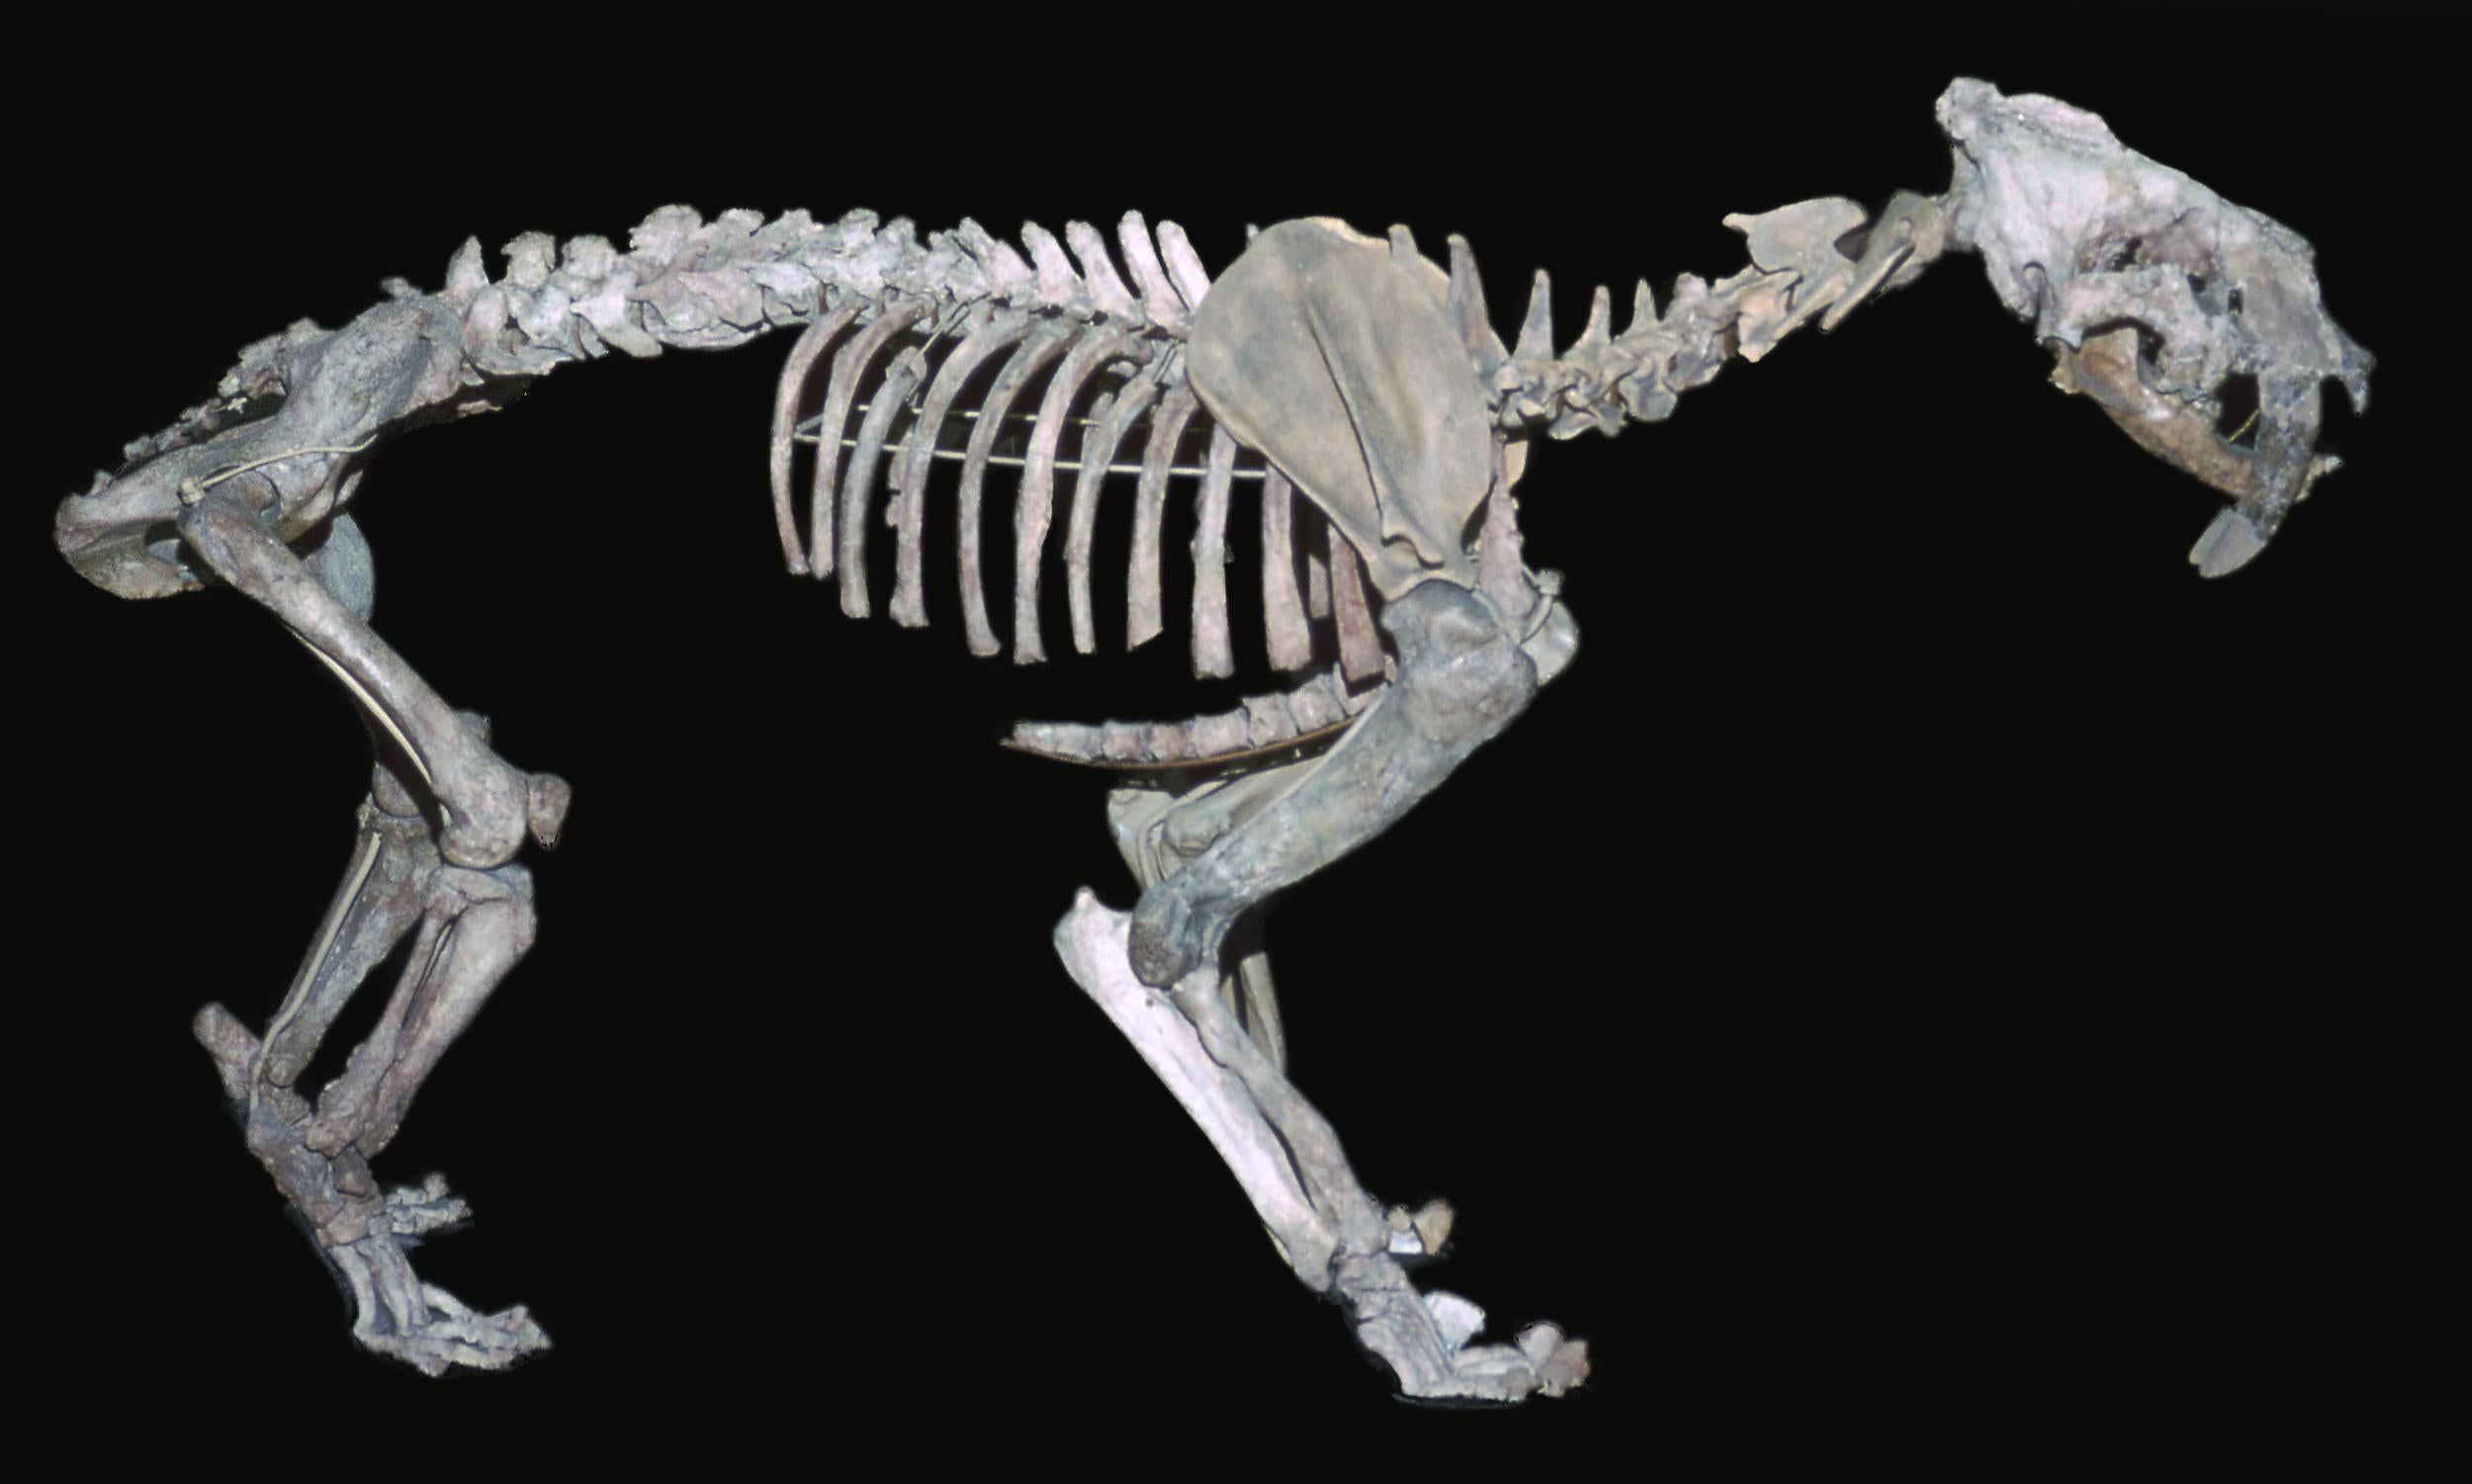 The heavily muscled species were once able to Hulk-smash their way through South America